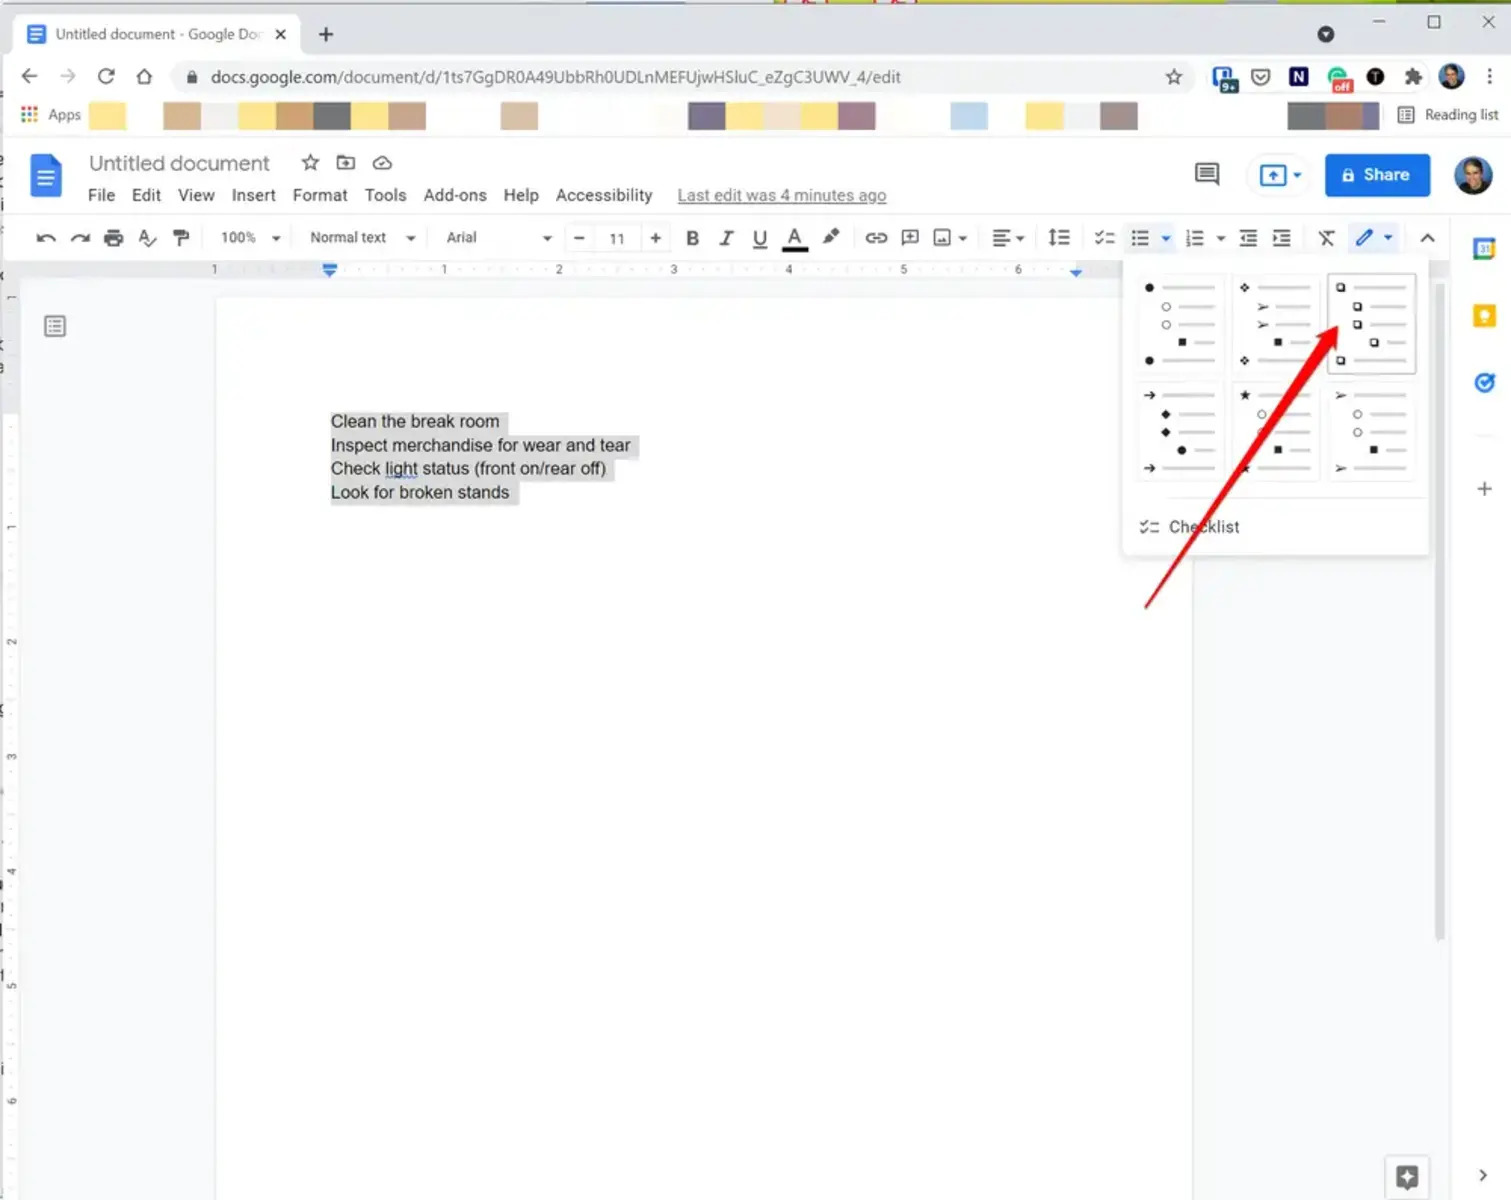 How To Make A Checklist In Google Docs